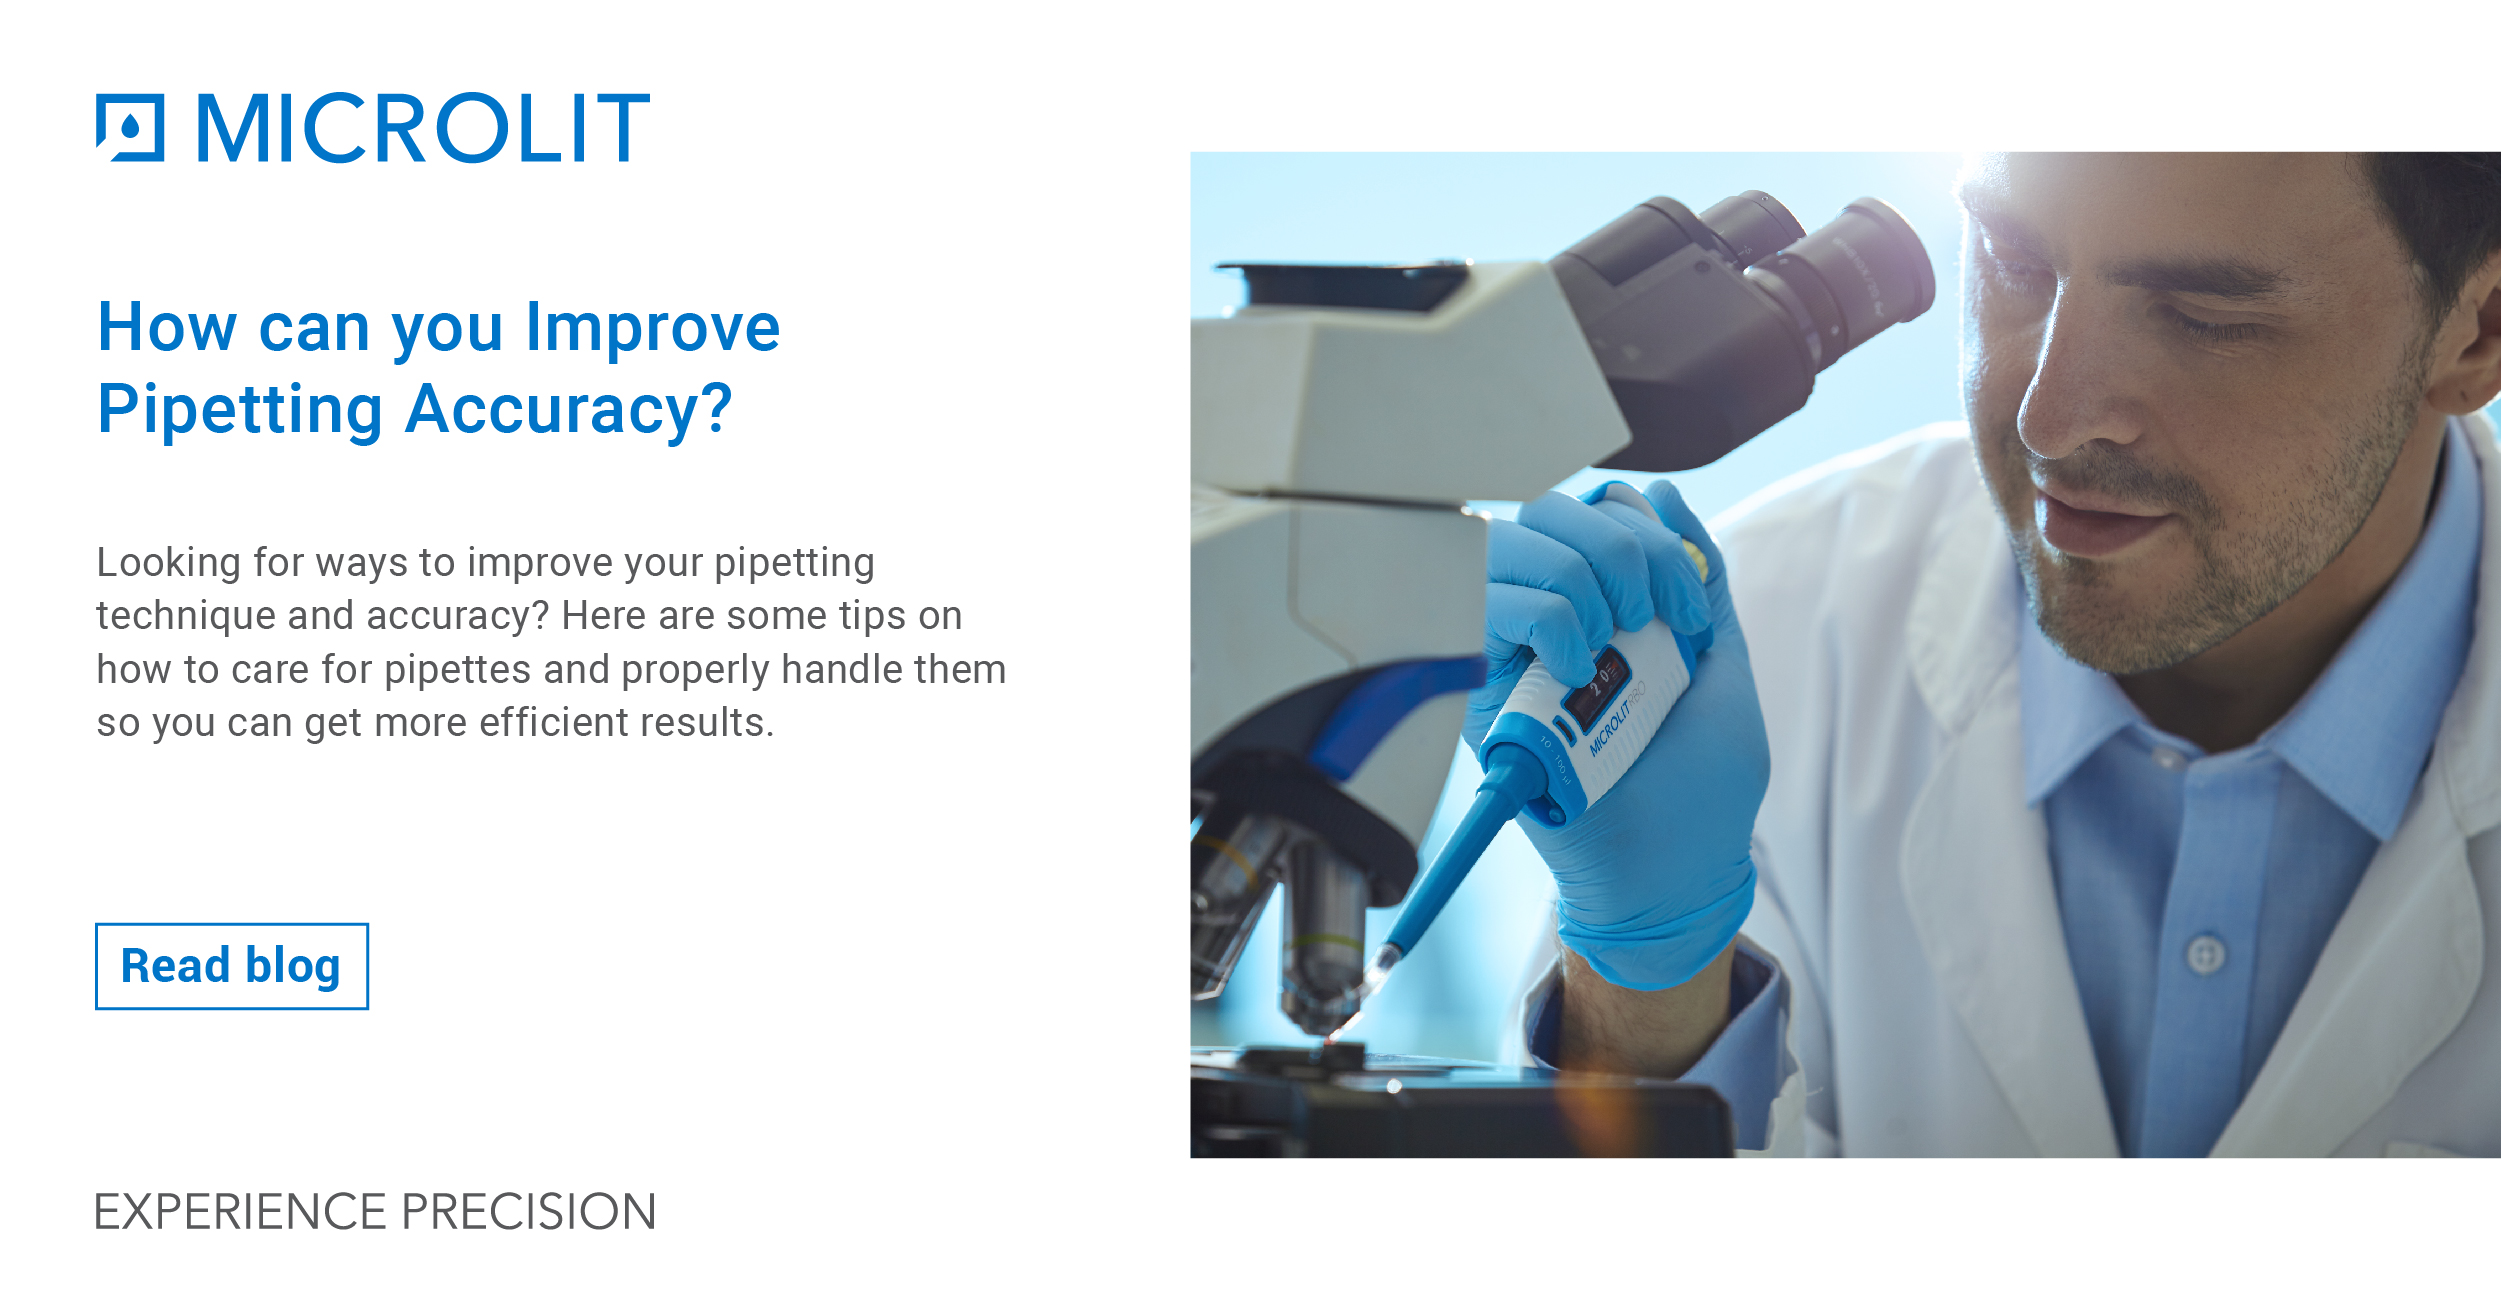 How can you improve Pipetting Accuracy?